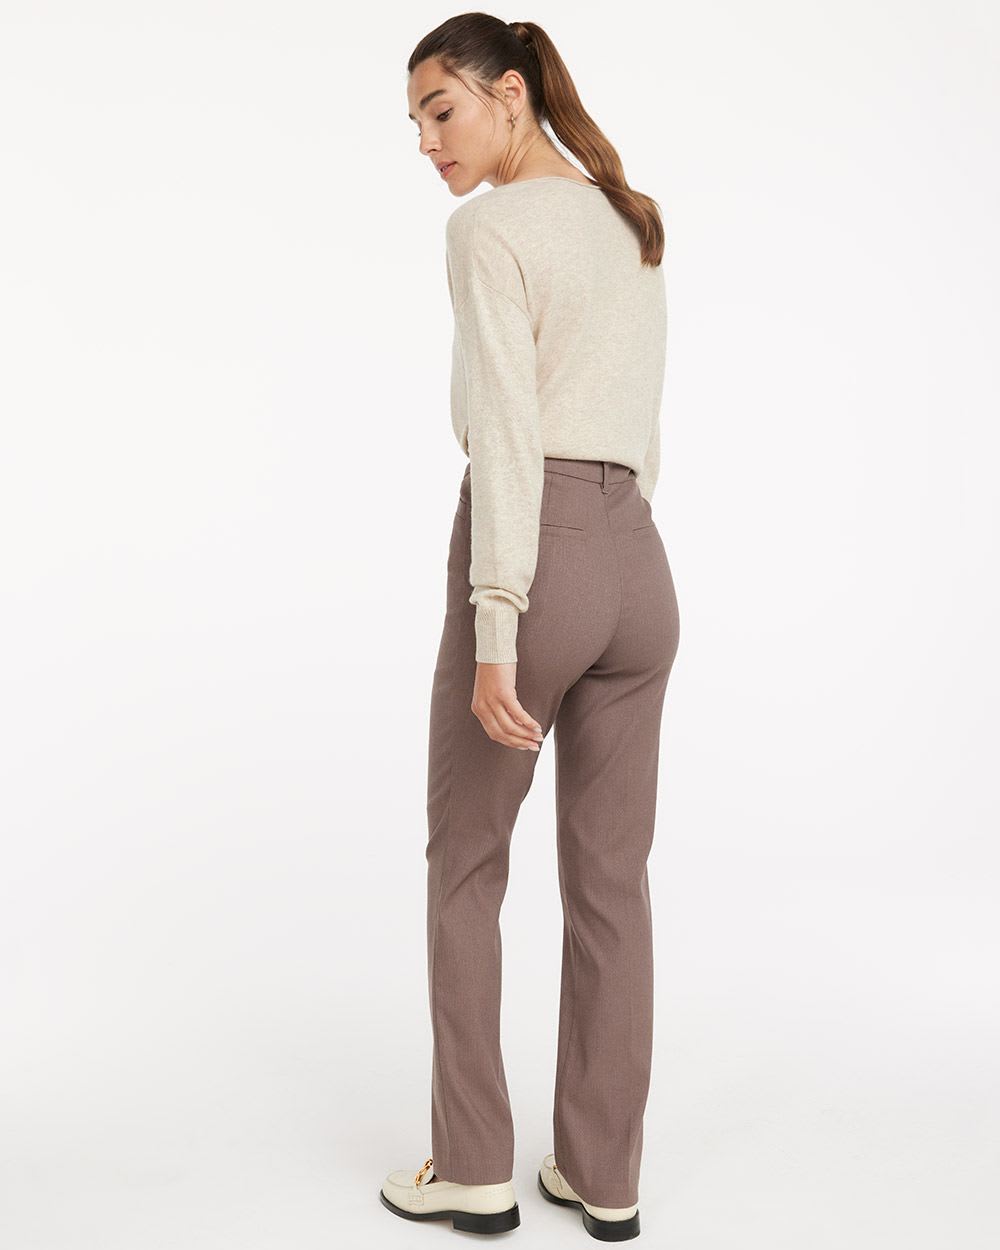 Straight Leg Pants with Zigzag Pattern, The Iconic